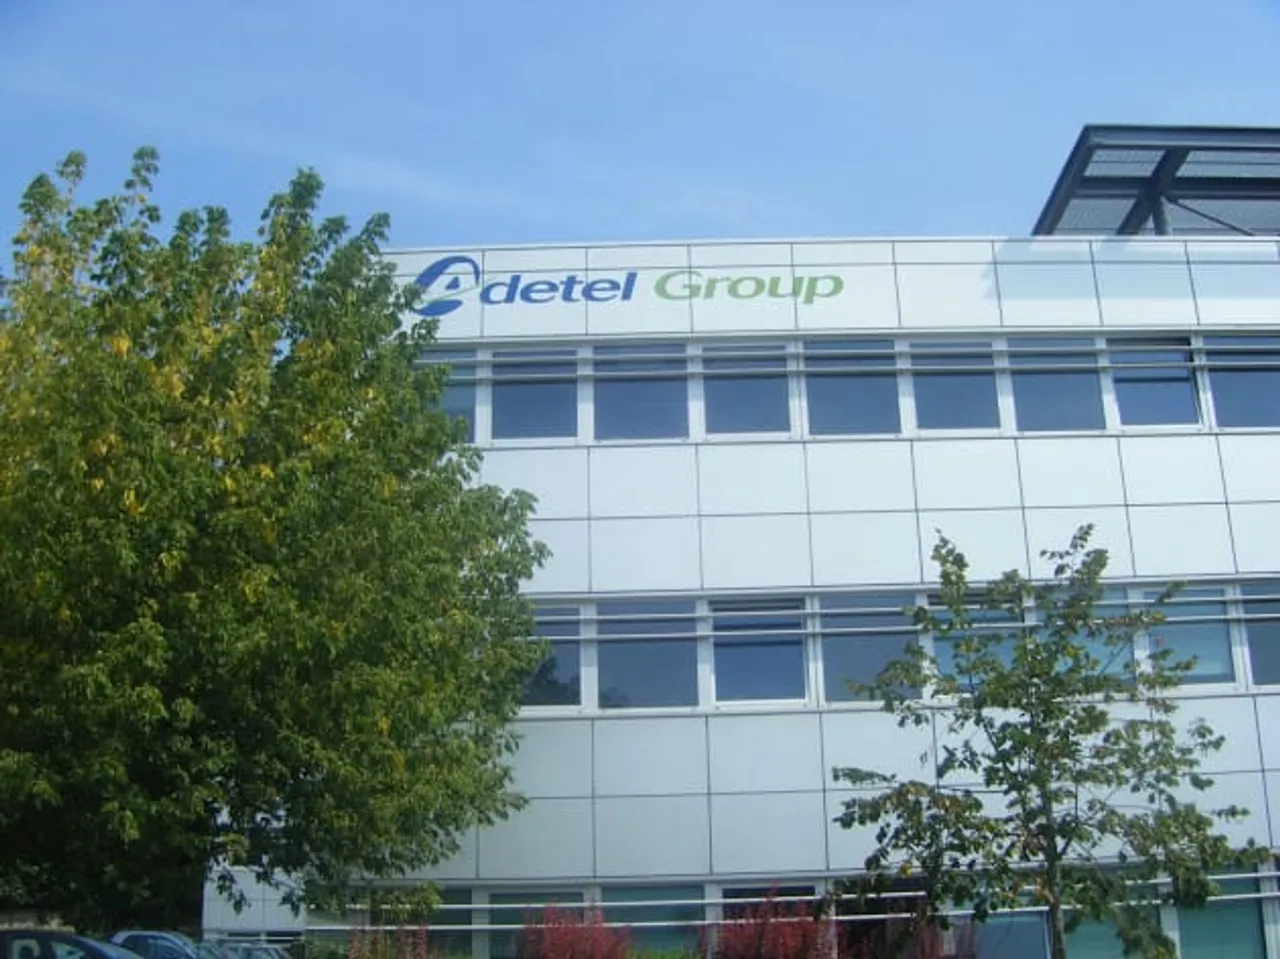 French Adetel Group